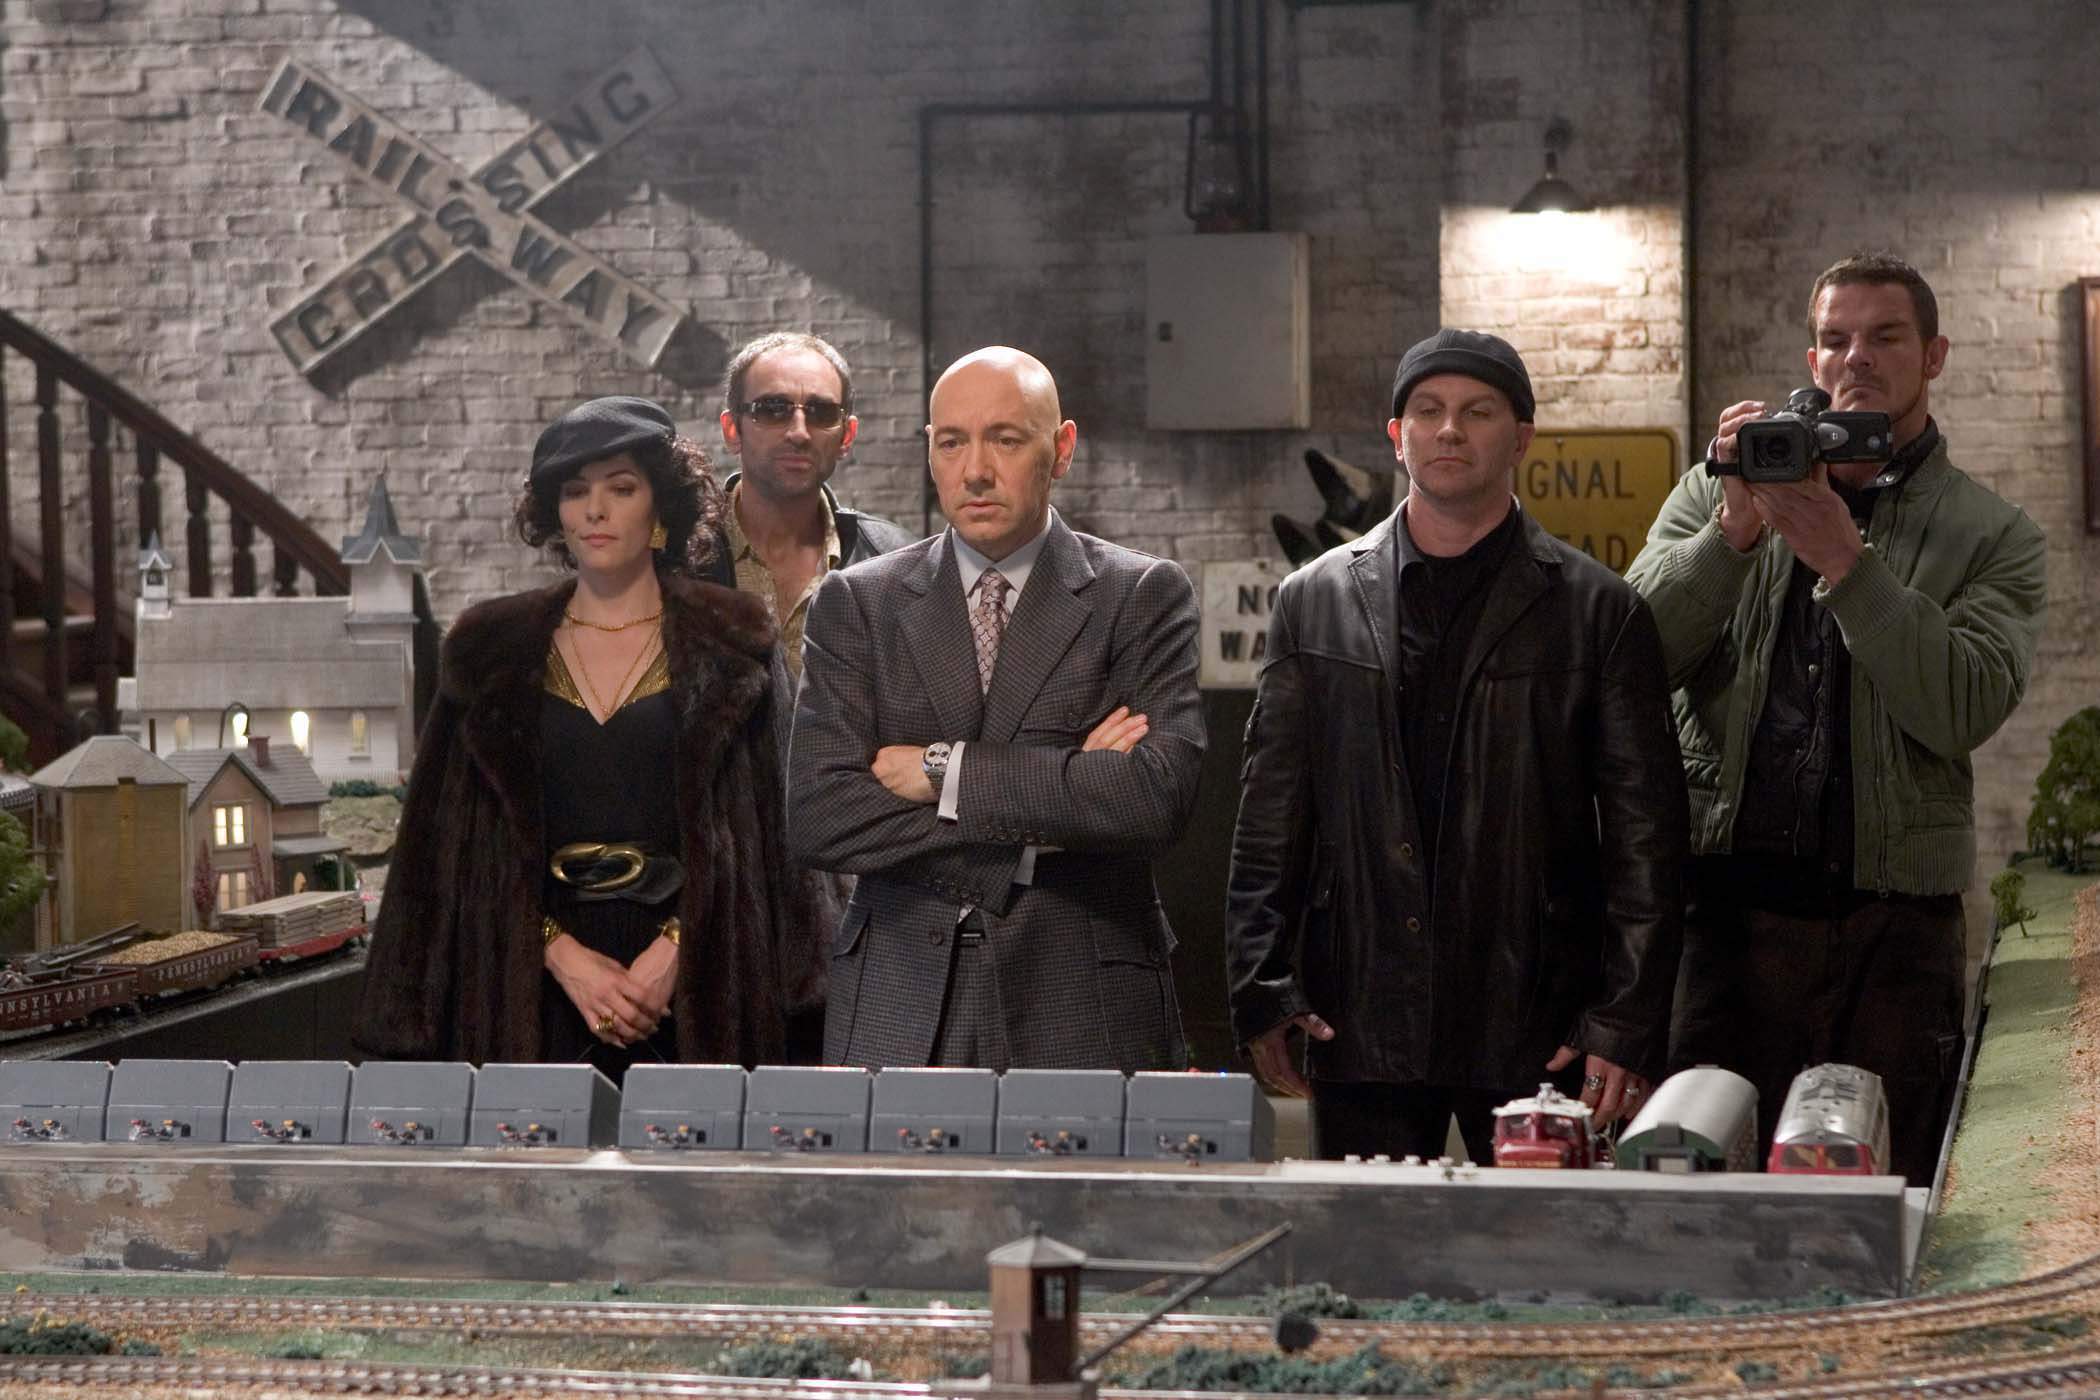 [L-R] Kitty Kowolski (PARKER POSEY), Grant (VINCENT STONE), Lex Luthor (KEVIN SPACEY), Brutus (DAVID FABRIZIO) and Riley (IAN ROBERTS).